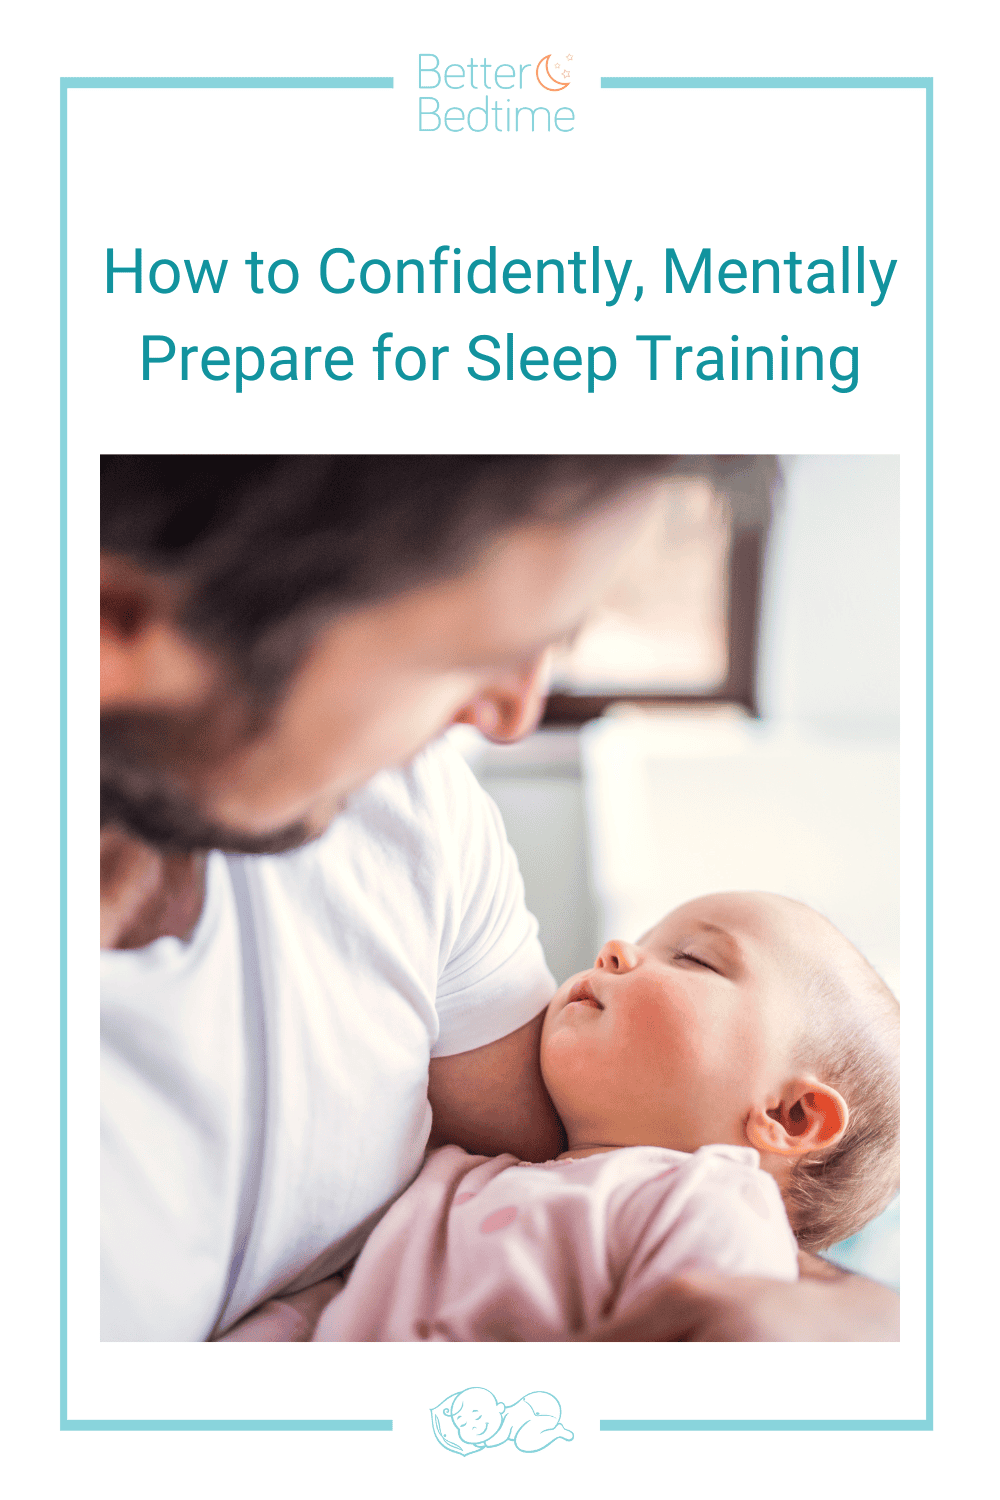 How to Confidently, Mentally Prepare for Sleep Training